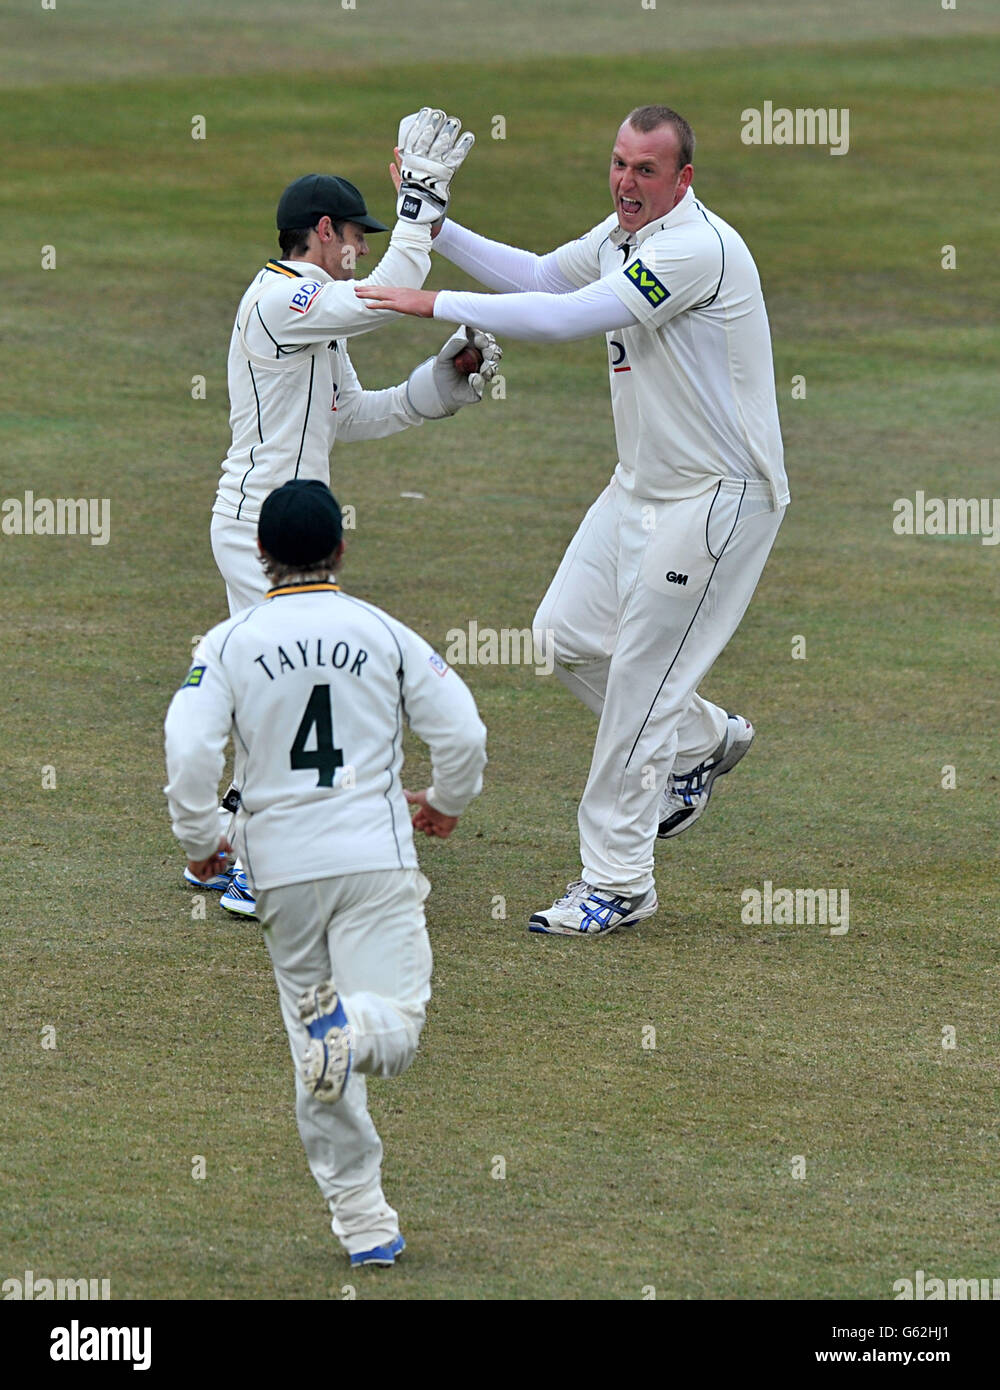 Nottinghamshire's Luke Fletcher (right) celebrates taking the wicket of Middlesex's Sam Robson during the LV=County Championship Division One match at Trent Bridge, Nottingham. Stock Photo